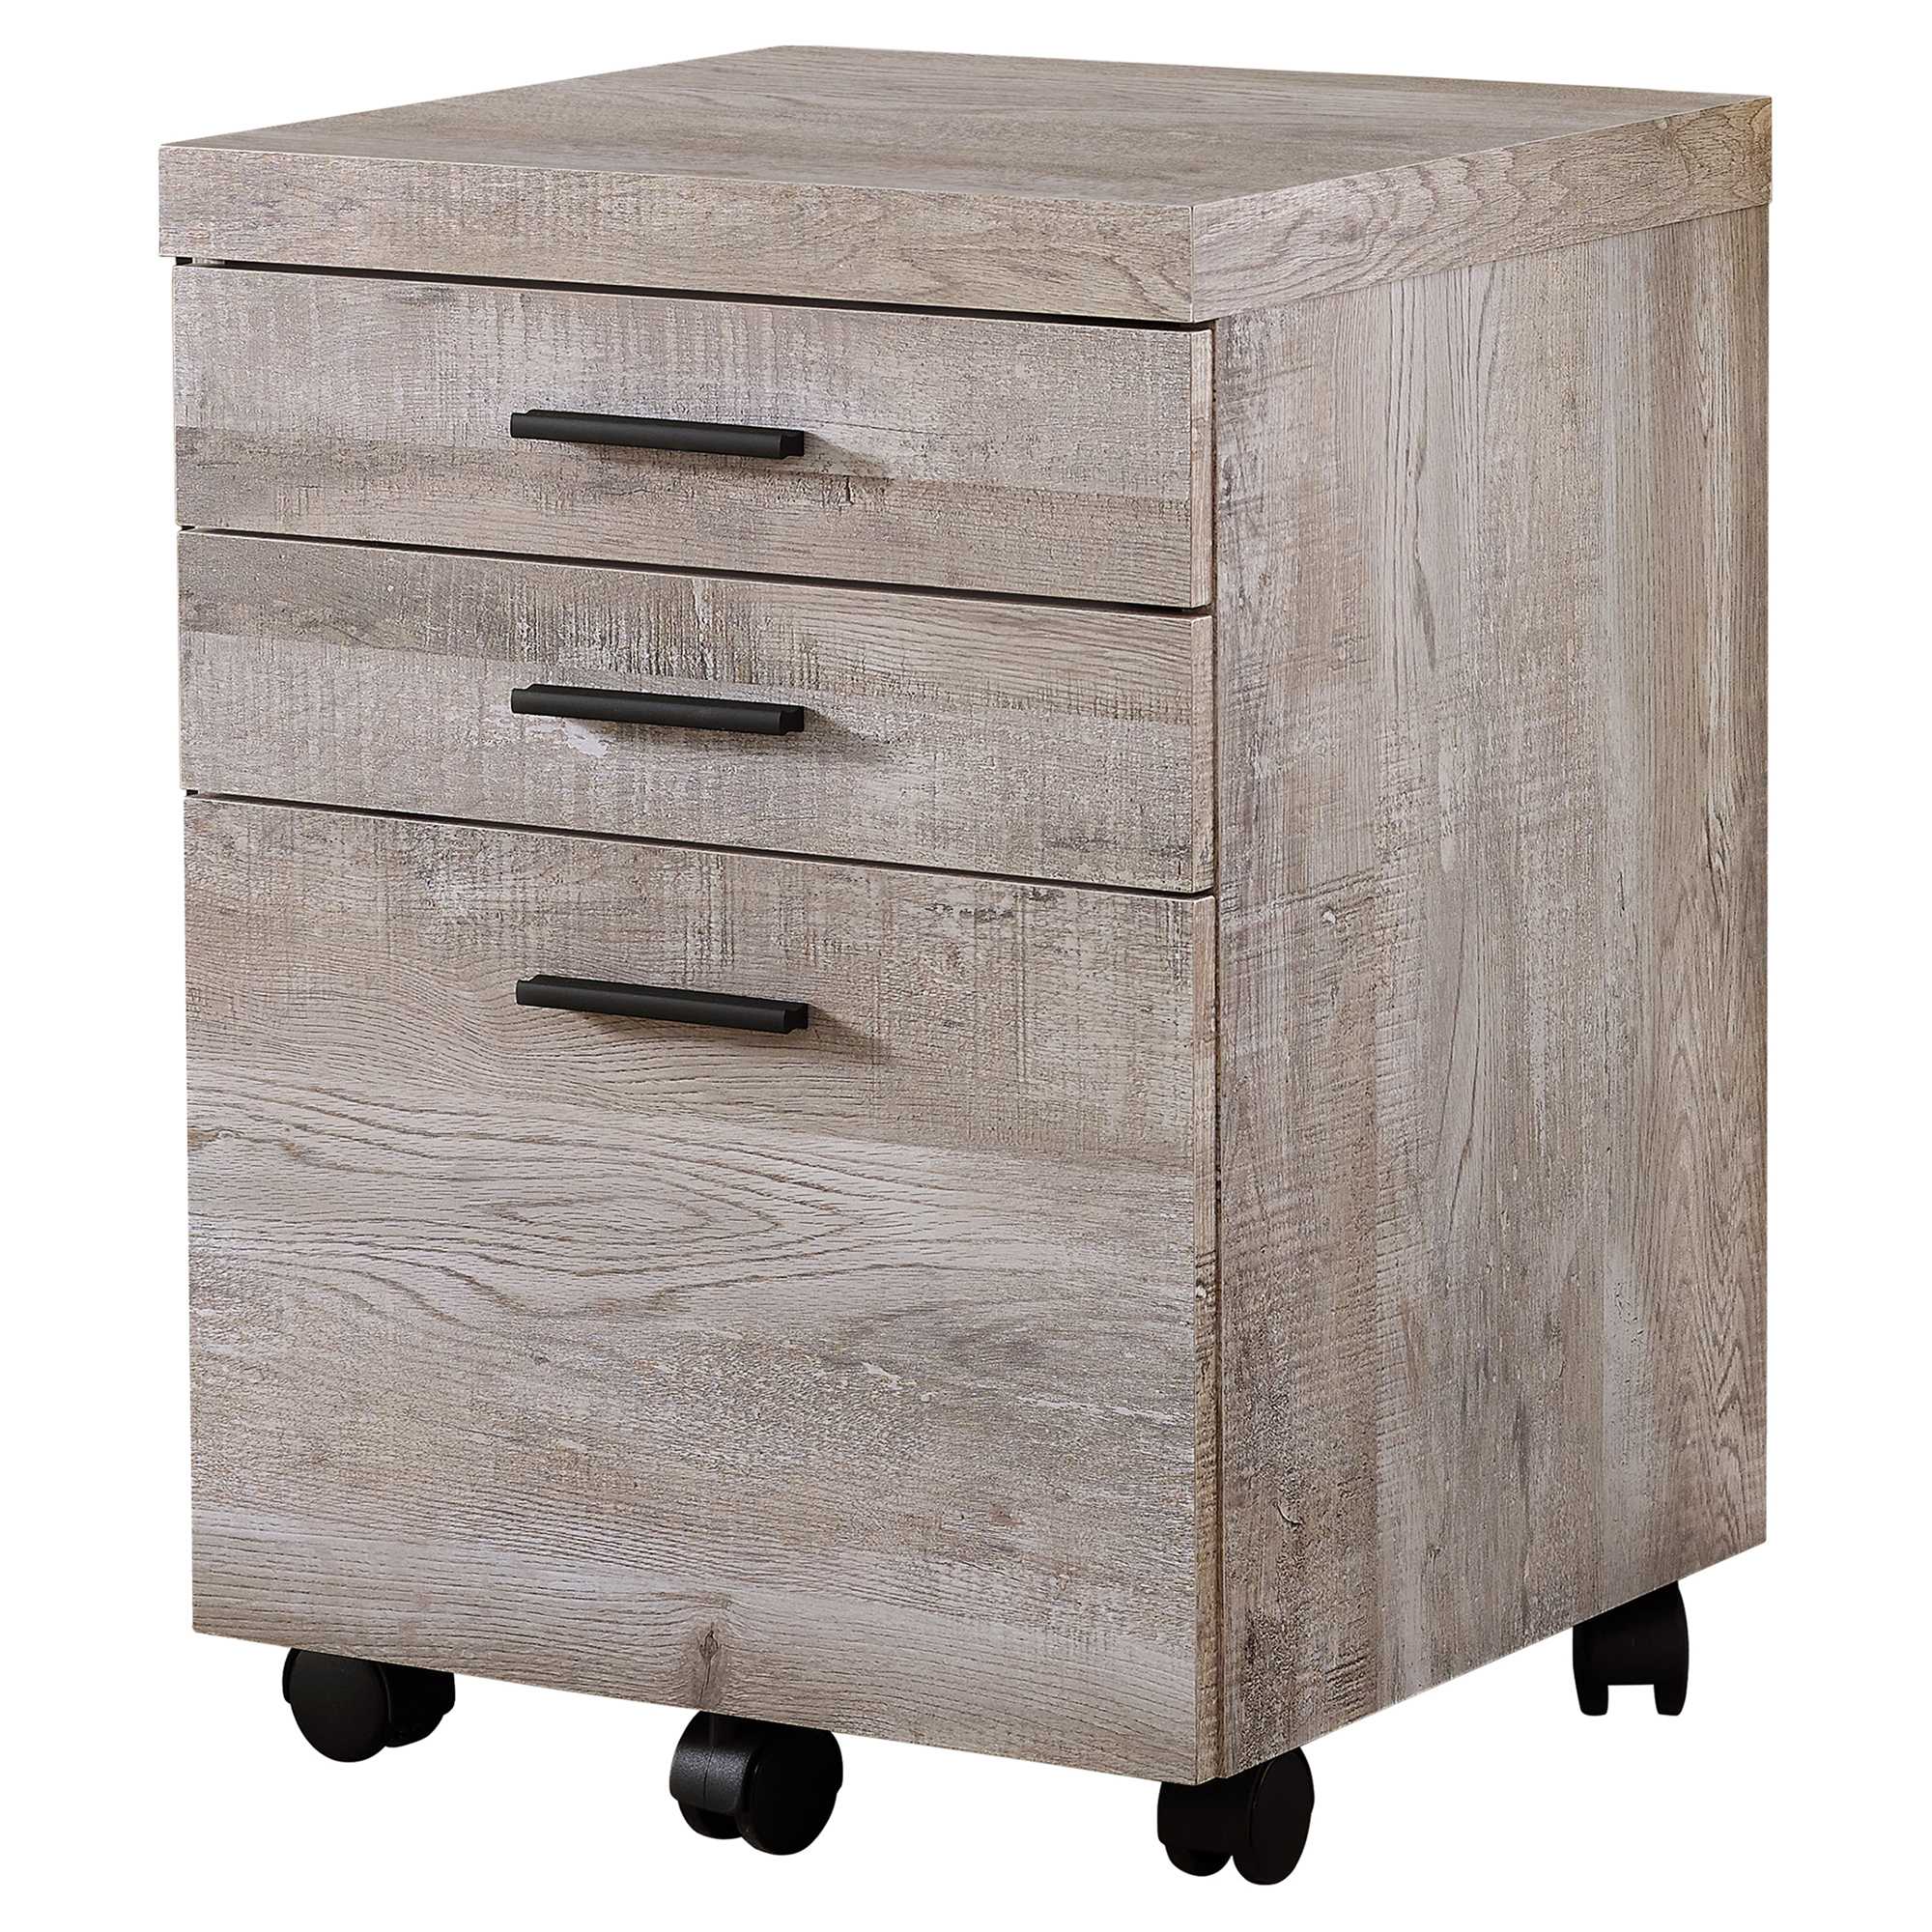 17.75" x 18.25" x 25.25" Taupe, Particle Board, 3 Drawers - Filing Cabinet